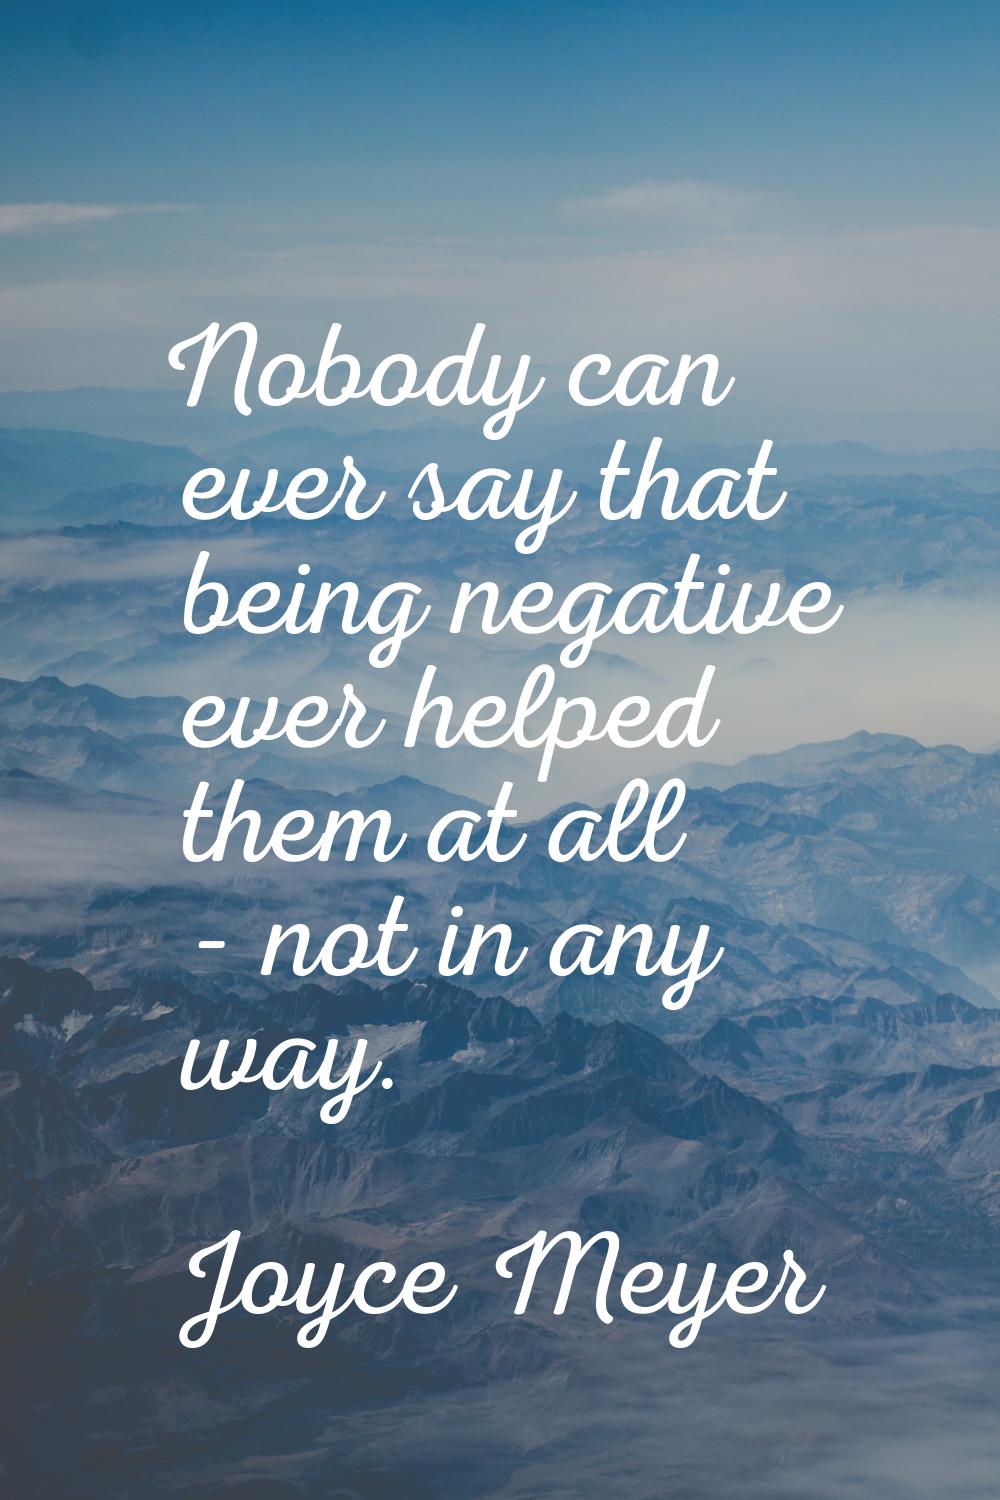 Nobody can ever say that being negative ever helped them at all - not in any way.